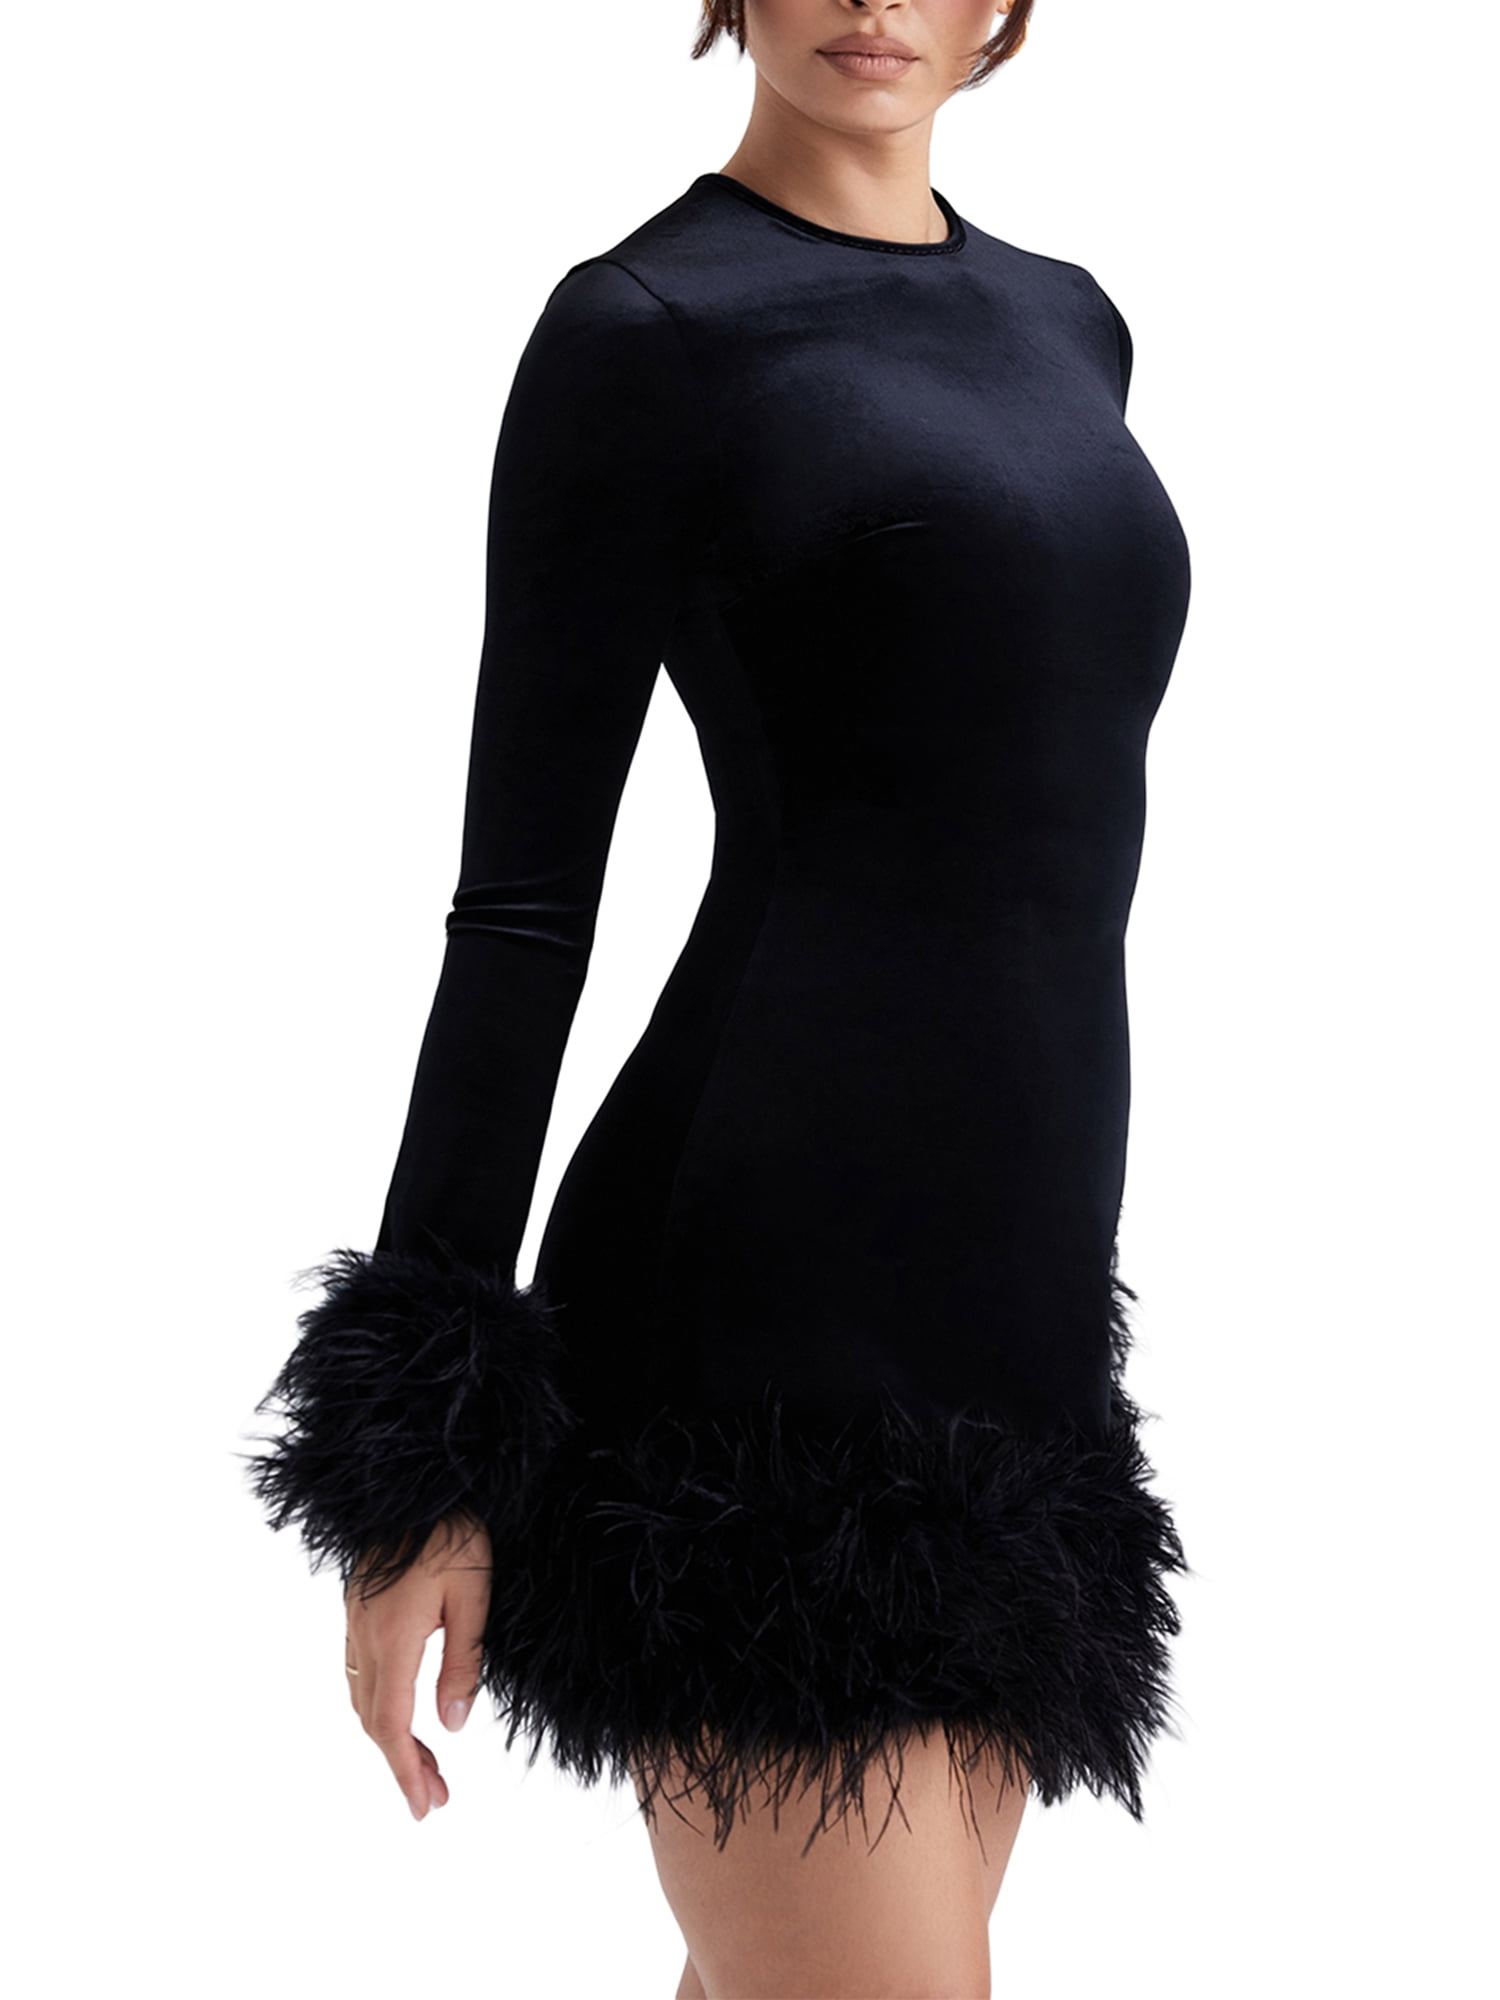 New Look 90s mini dress with faux feather trim in black